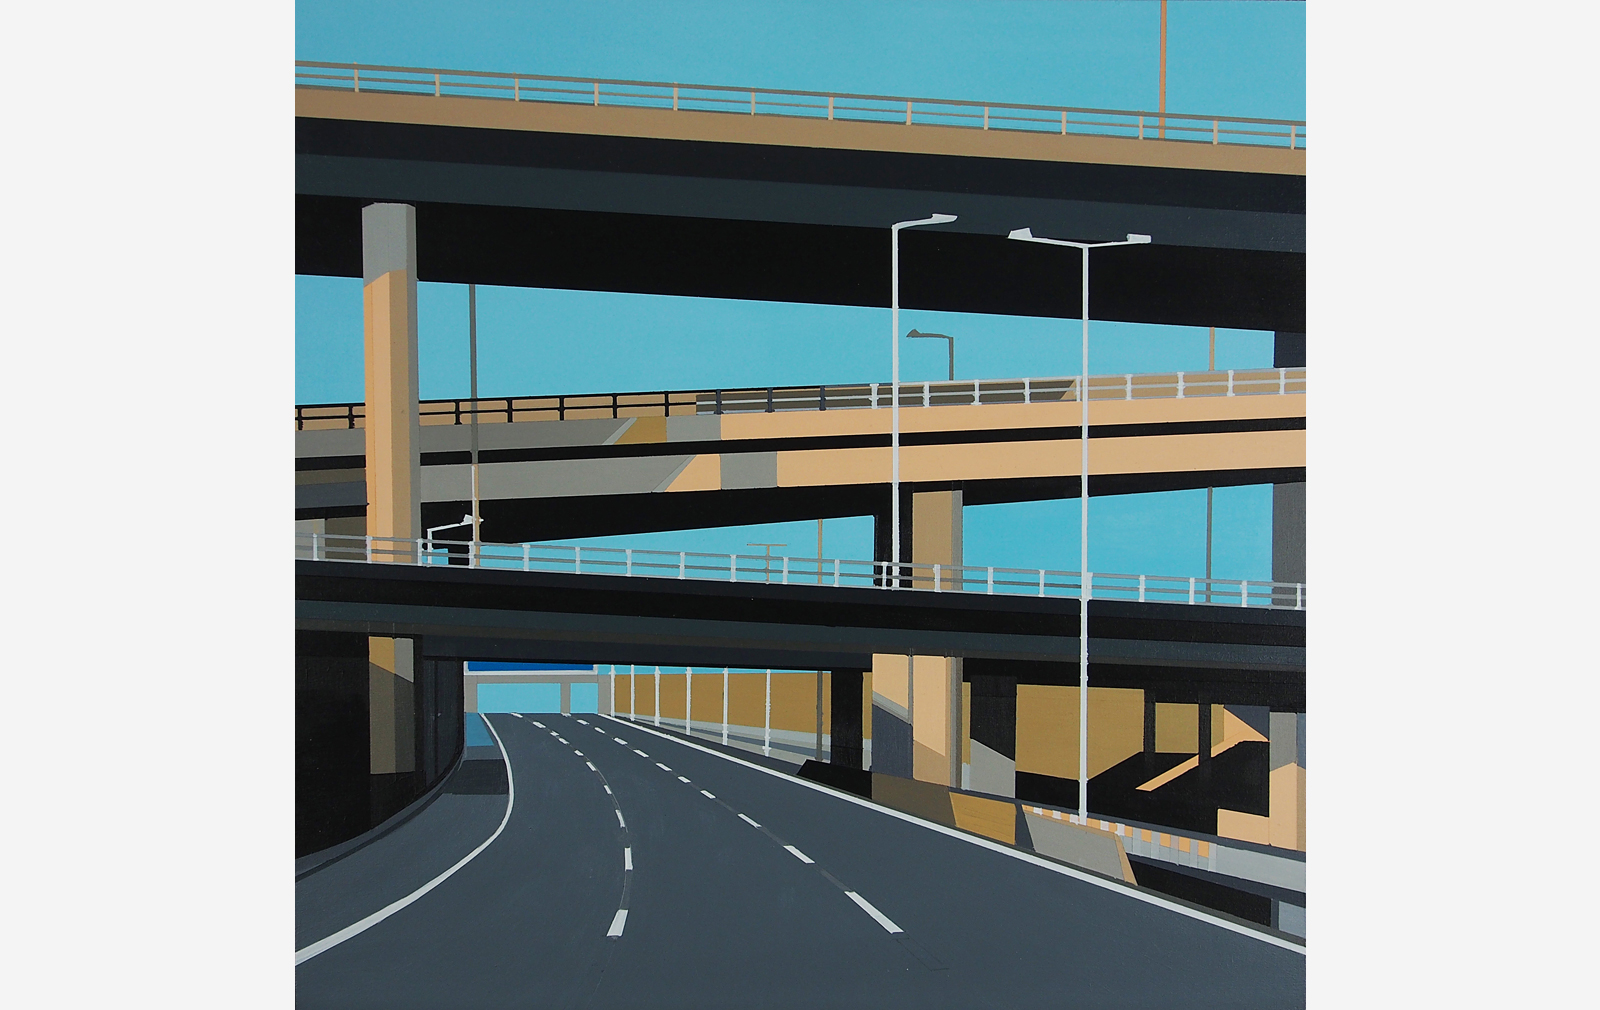 'M25' by Kate Jackson. Part of the series British Road Movies